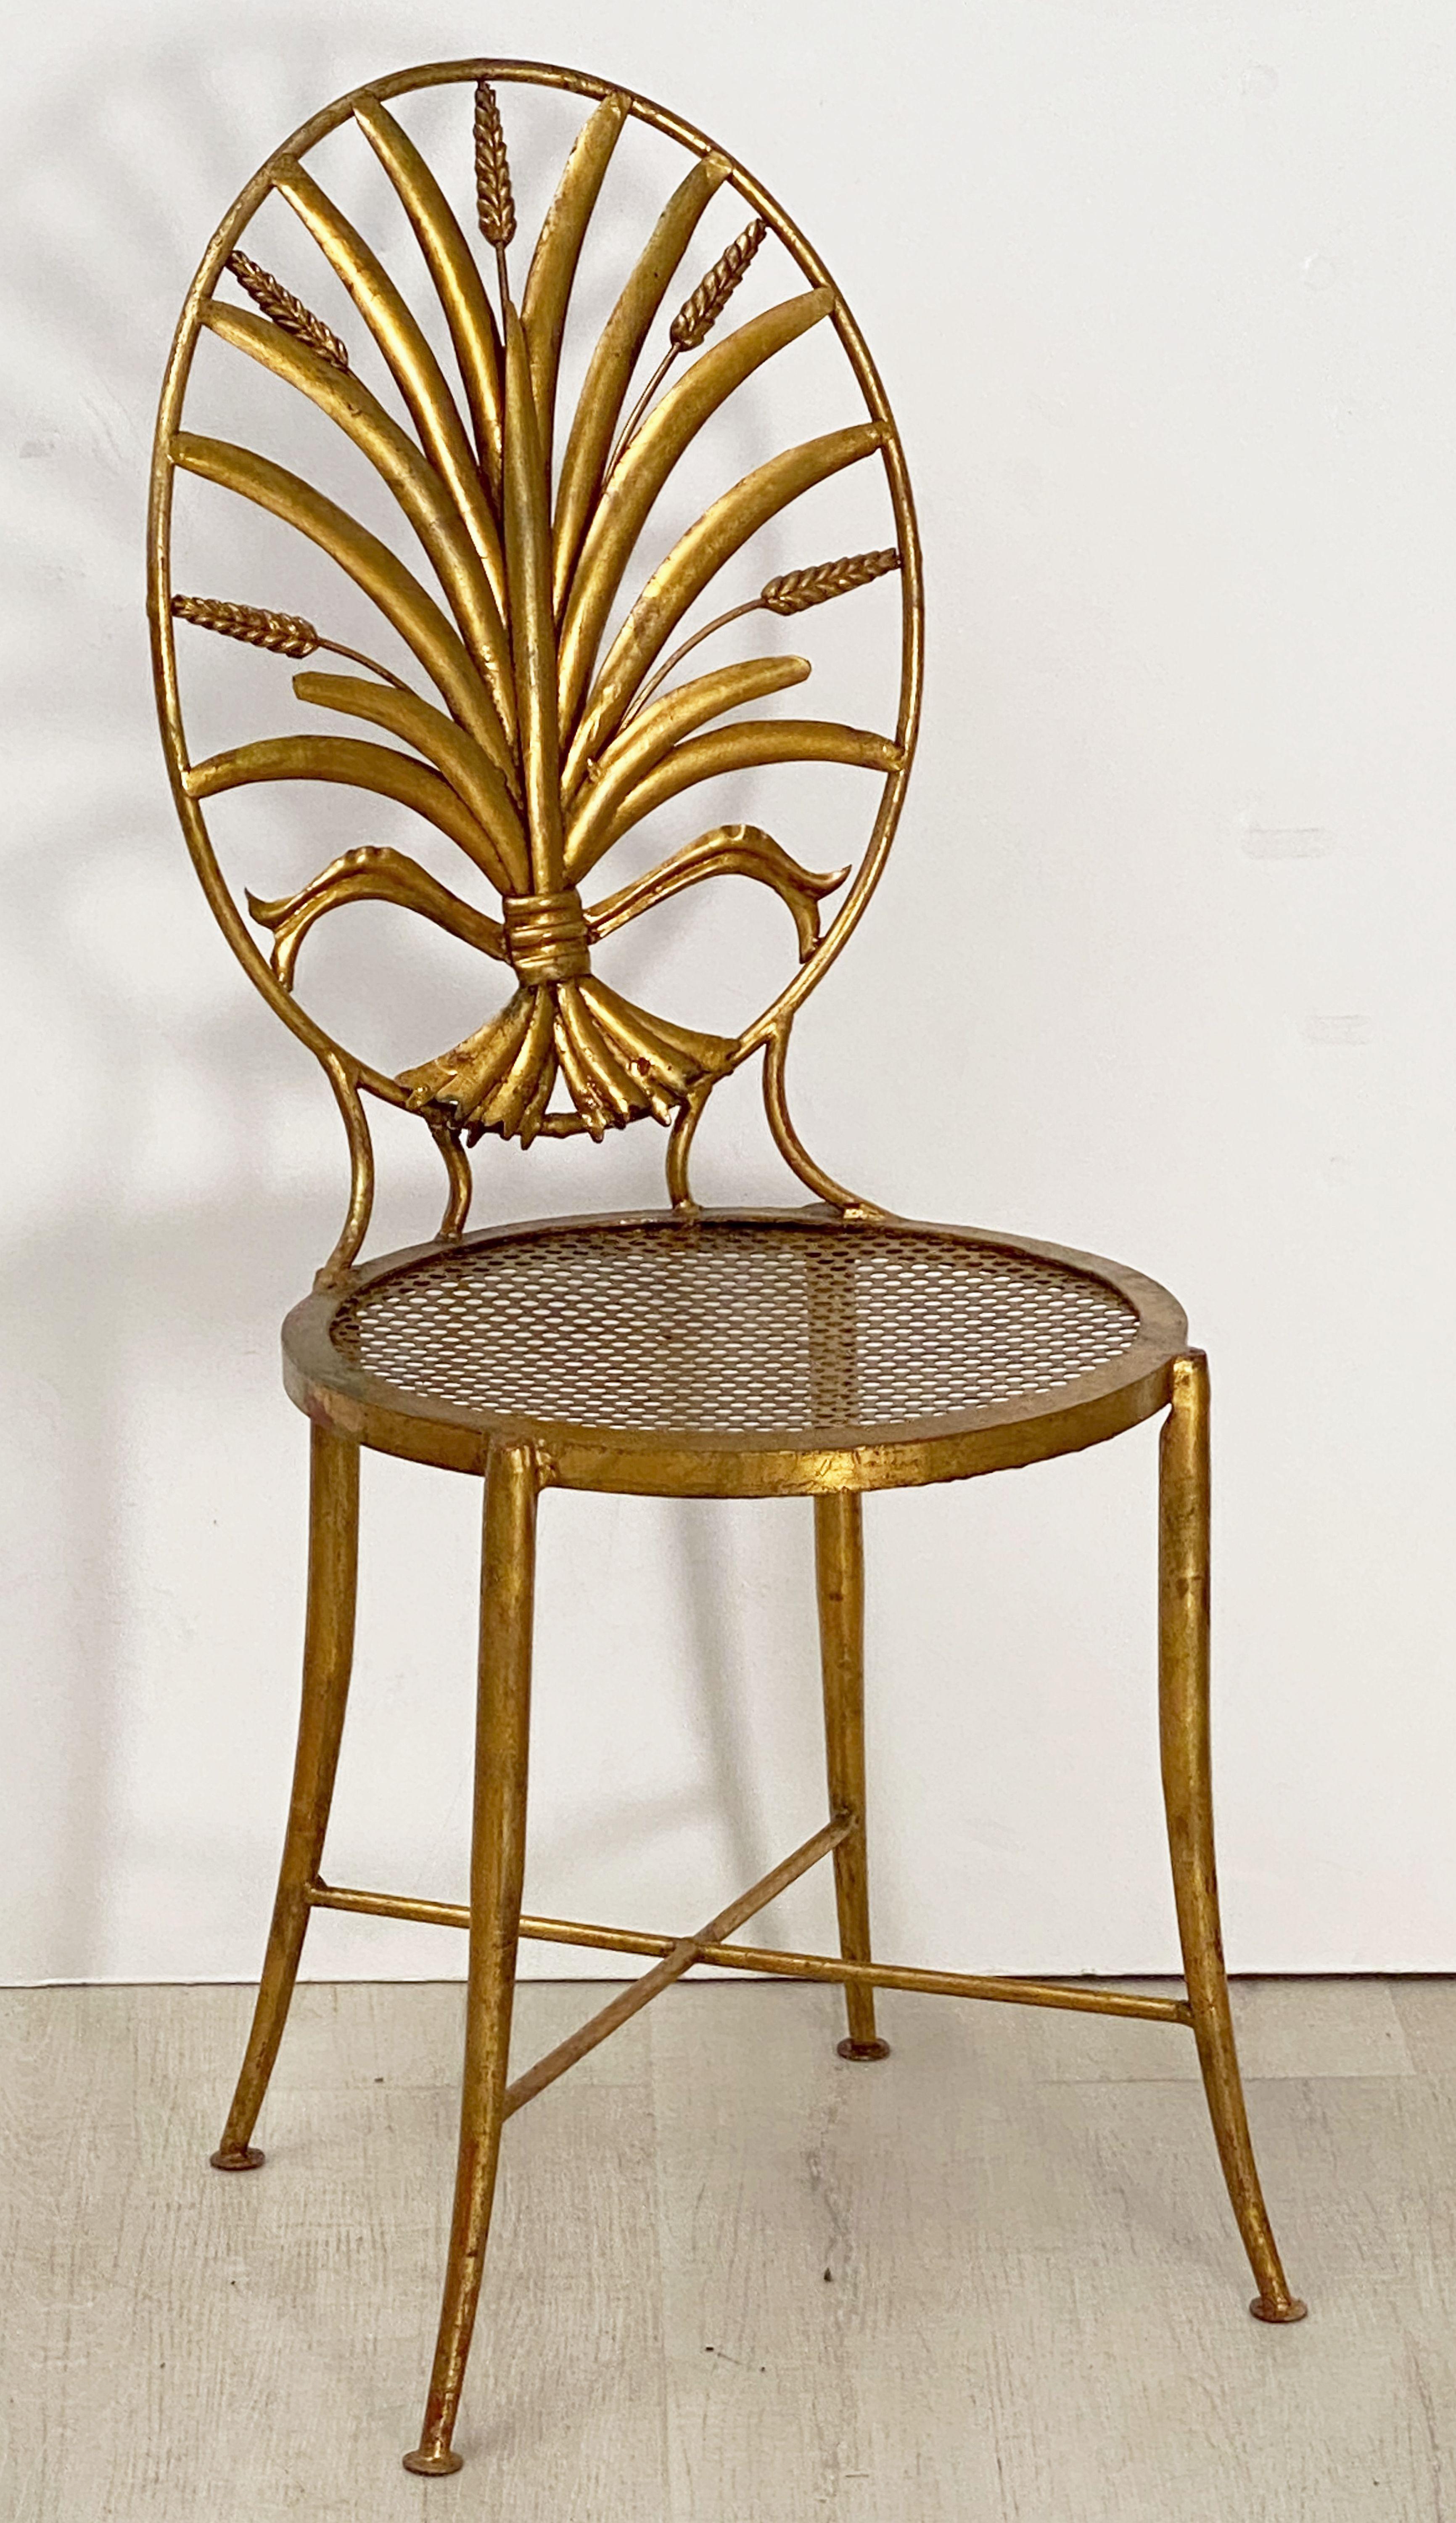 Italian Wheat Sheaf Cocktail Table and Chairs Set by S. Salvadori, Firenze 5